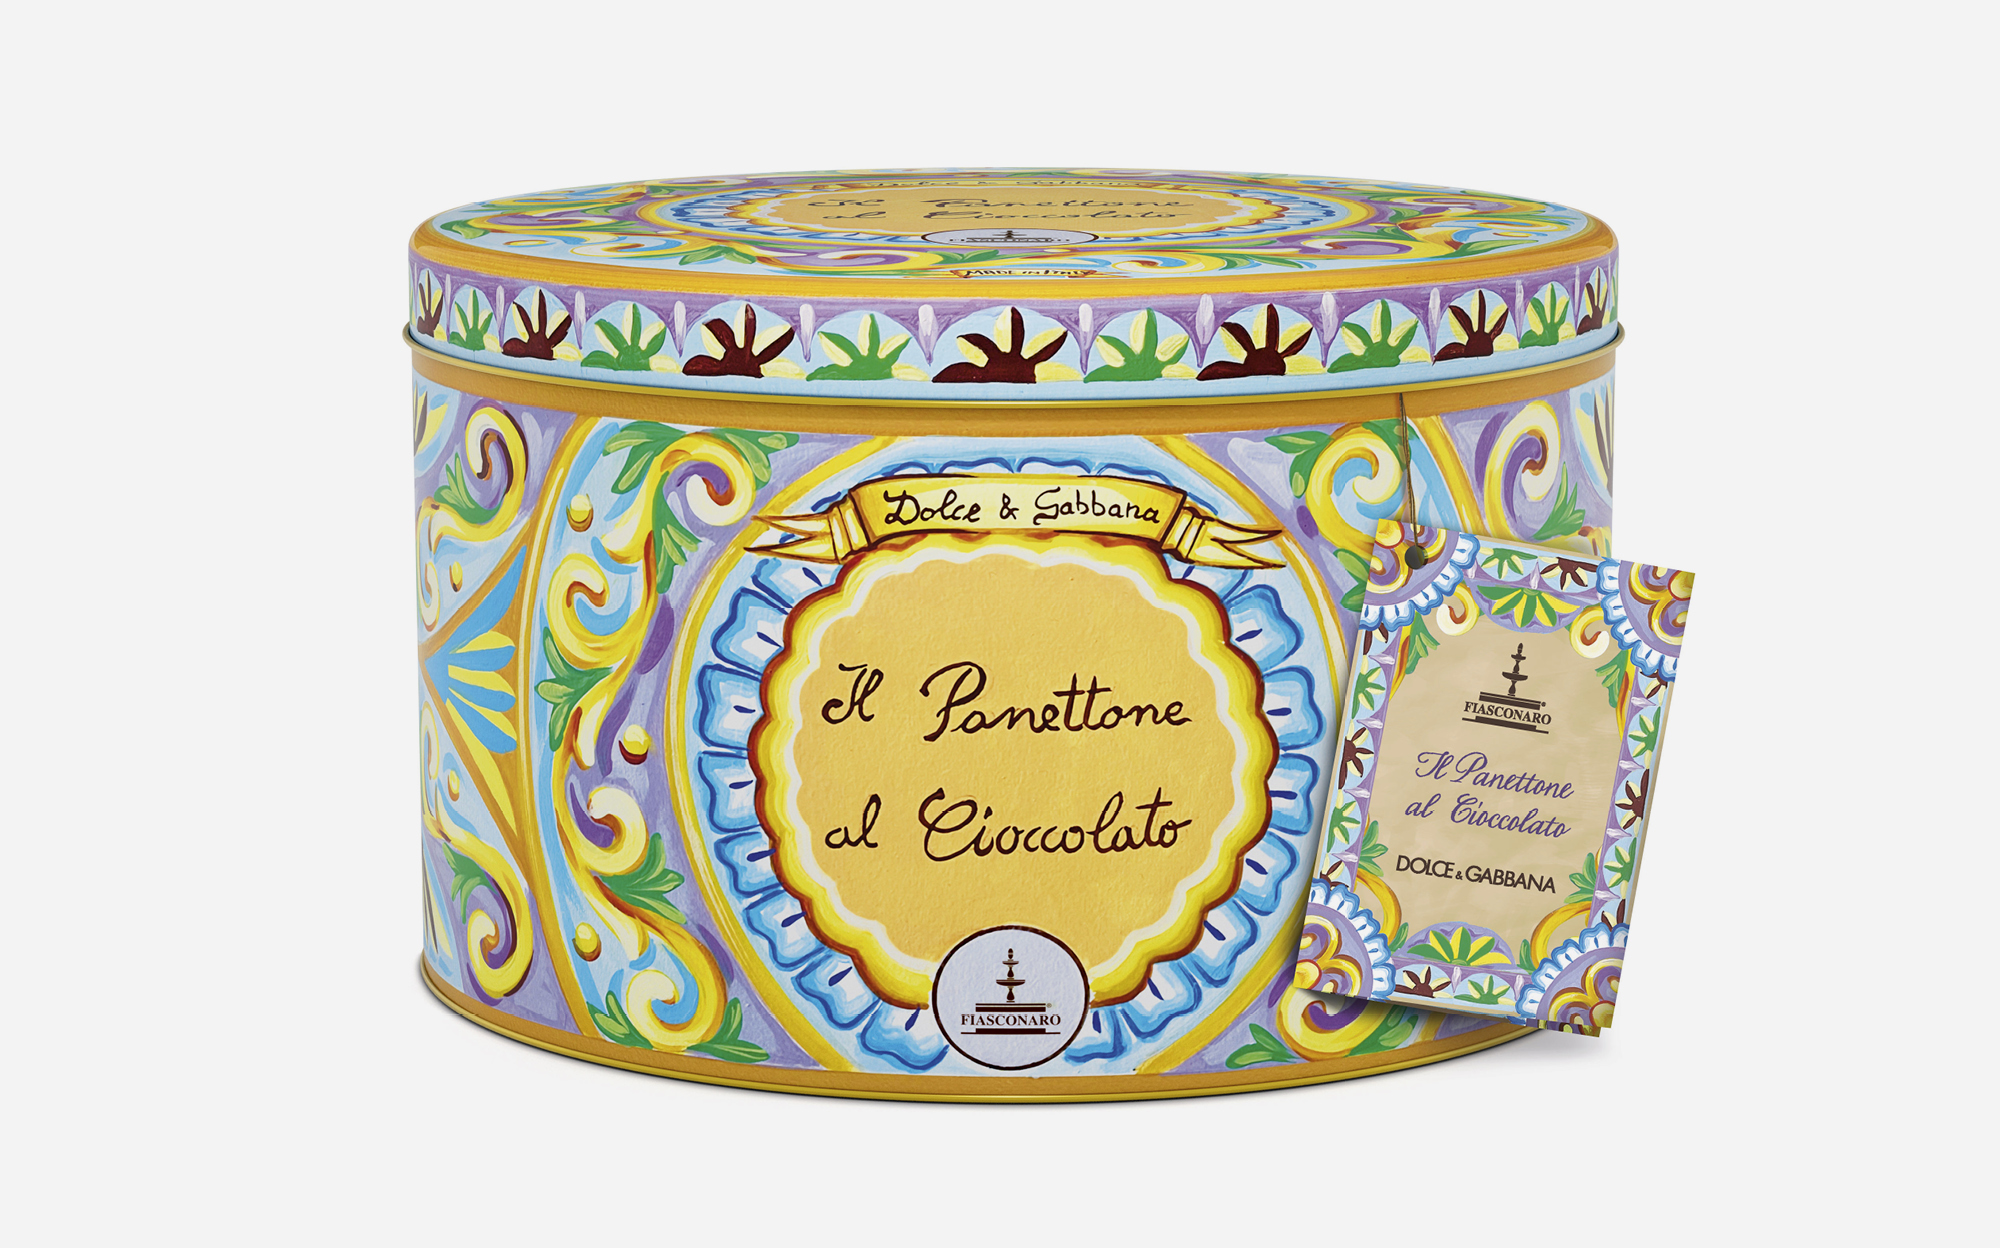 Panettone in an extravagant Dolce & Gabbana-designed tin, the result of the fashion house's collaboration with luxury food brand, Fiasconaro